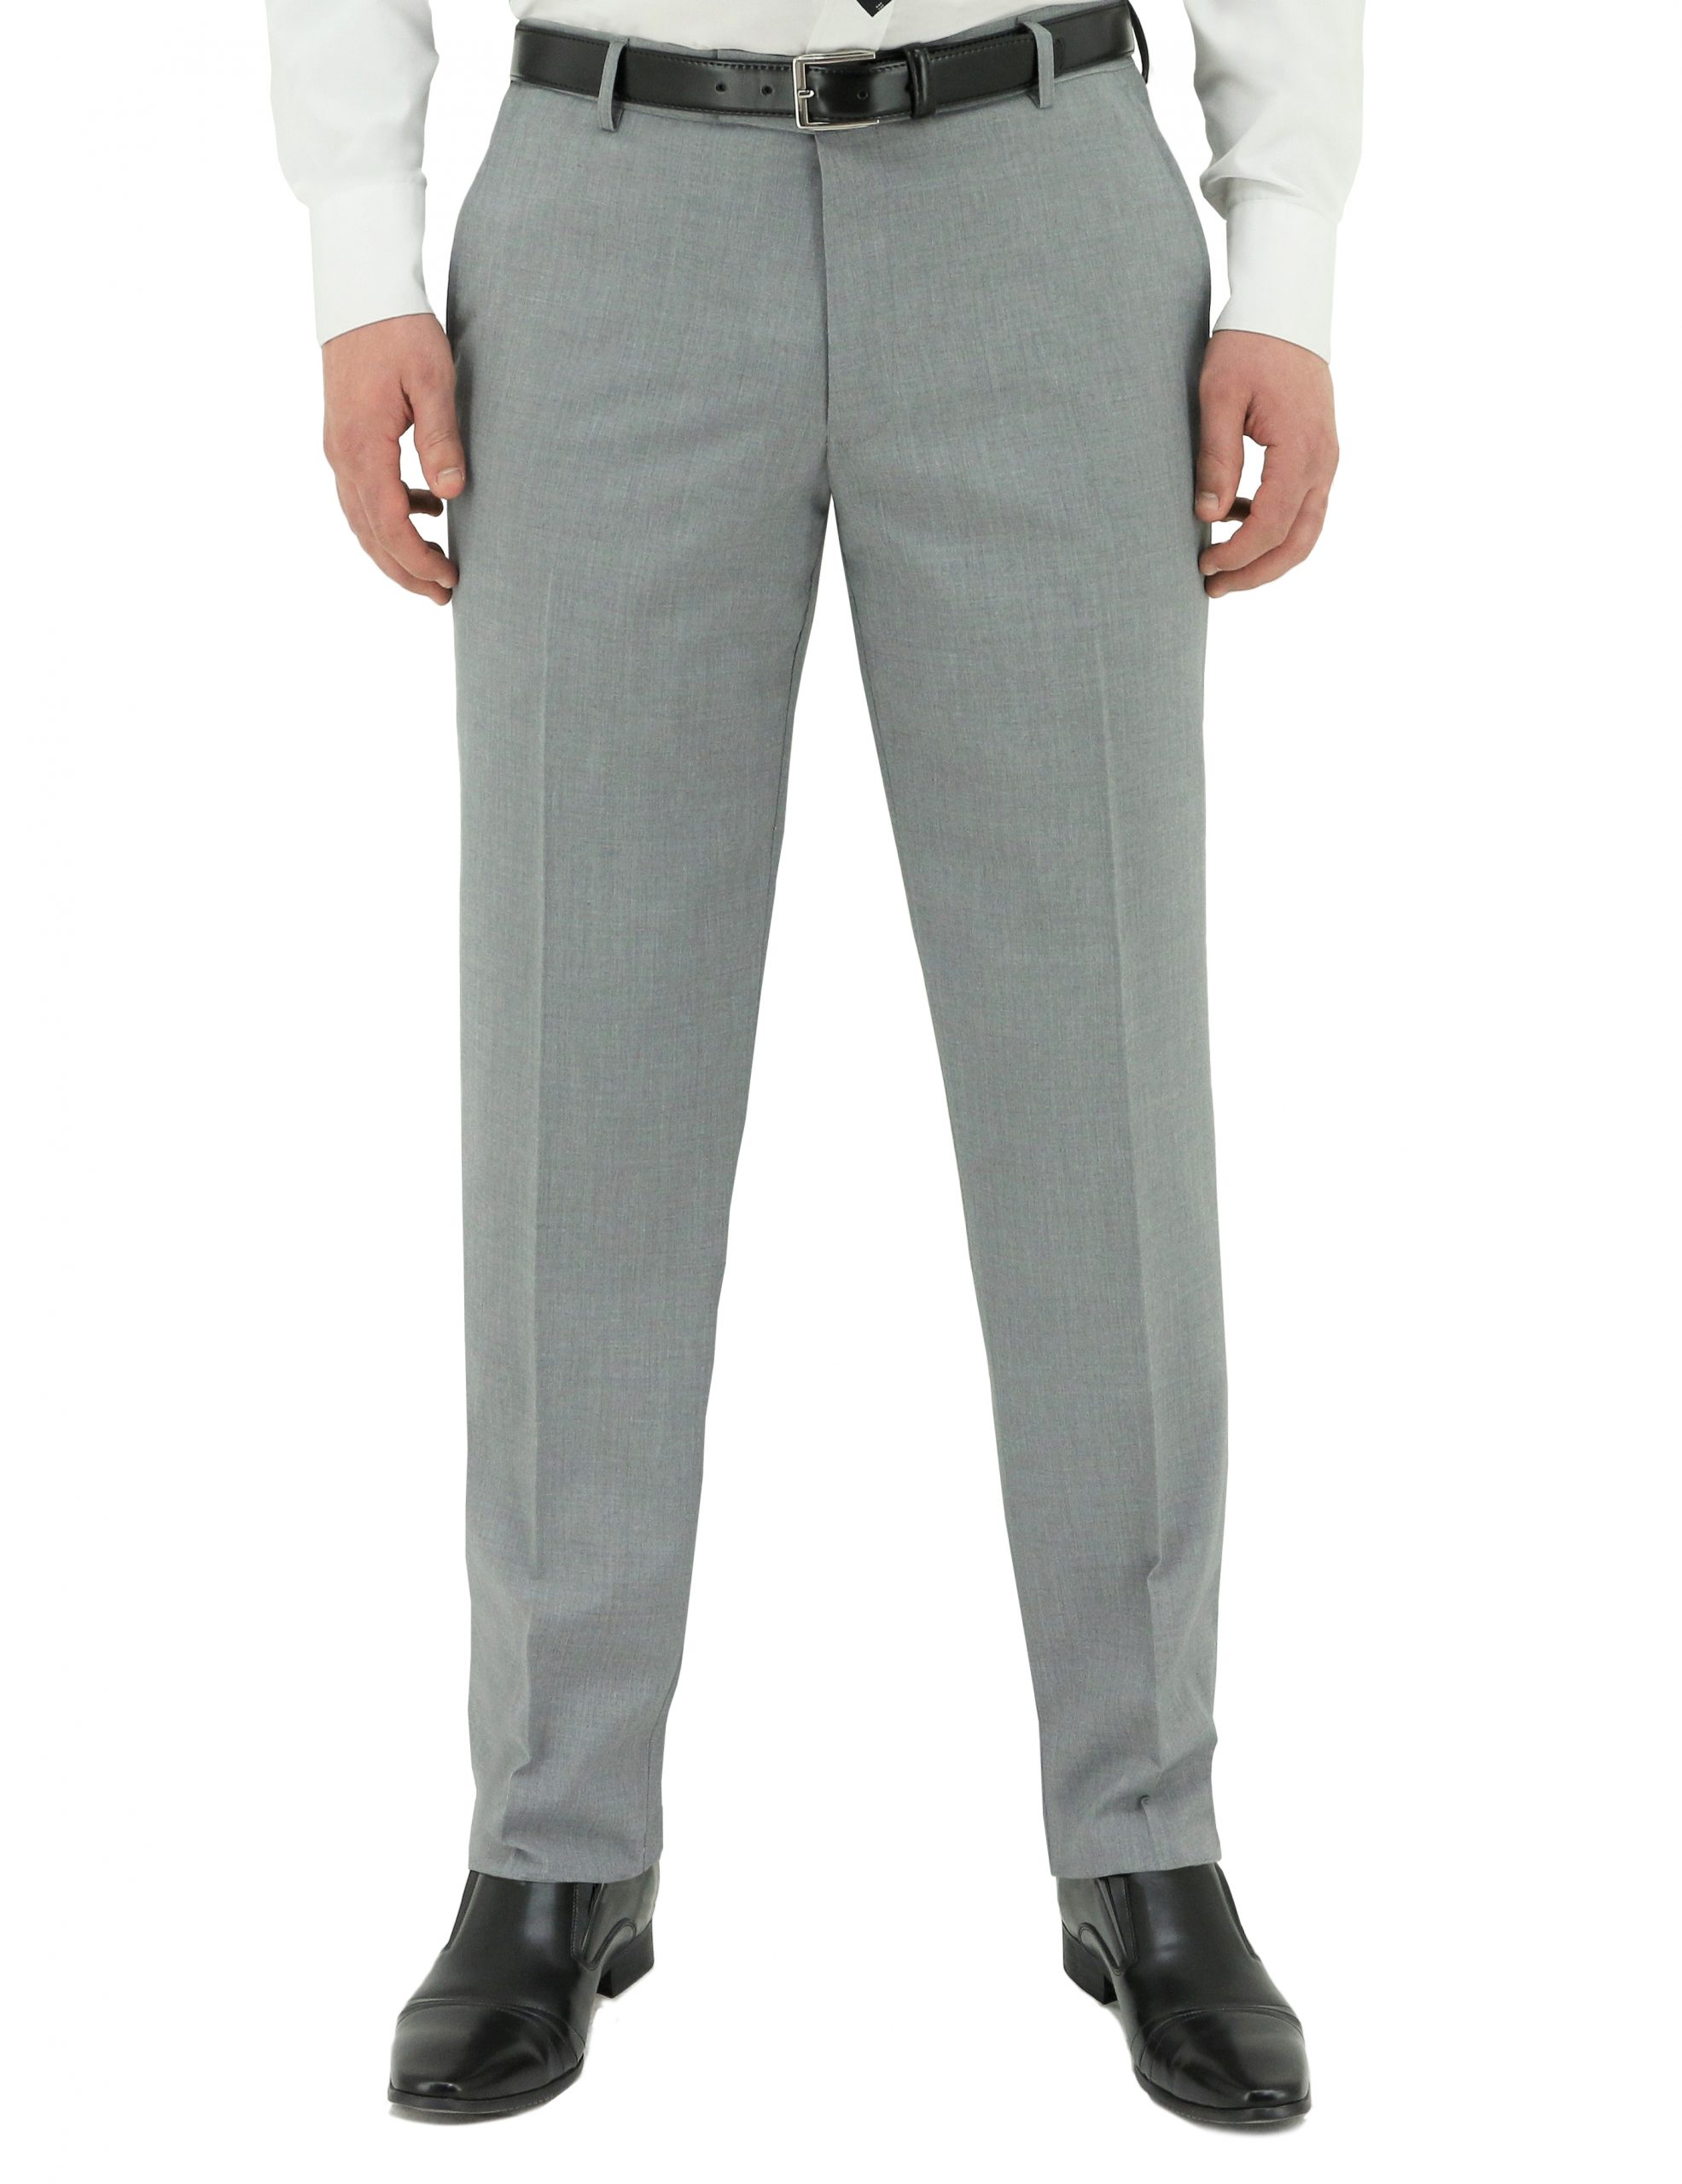 Light Grey Harley Trouser - Spectre Collection